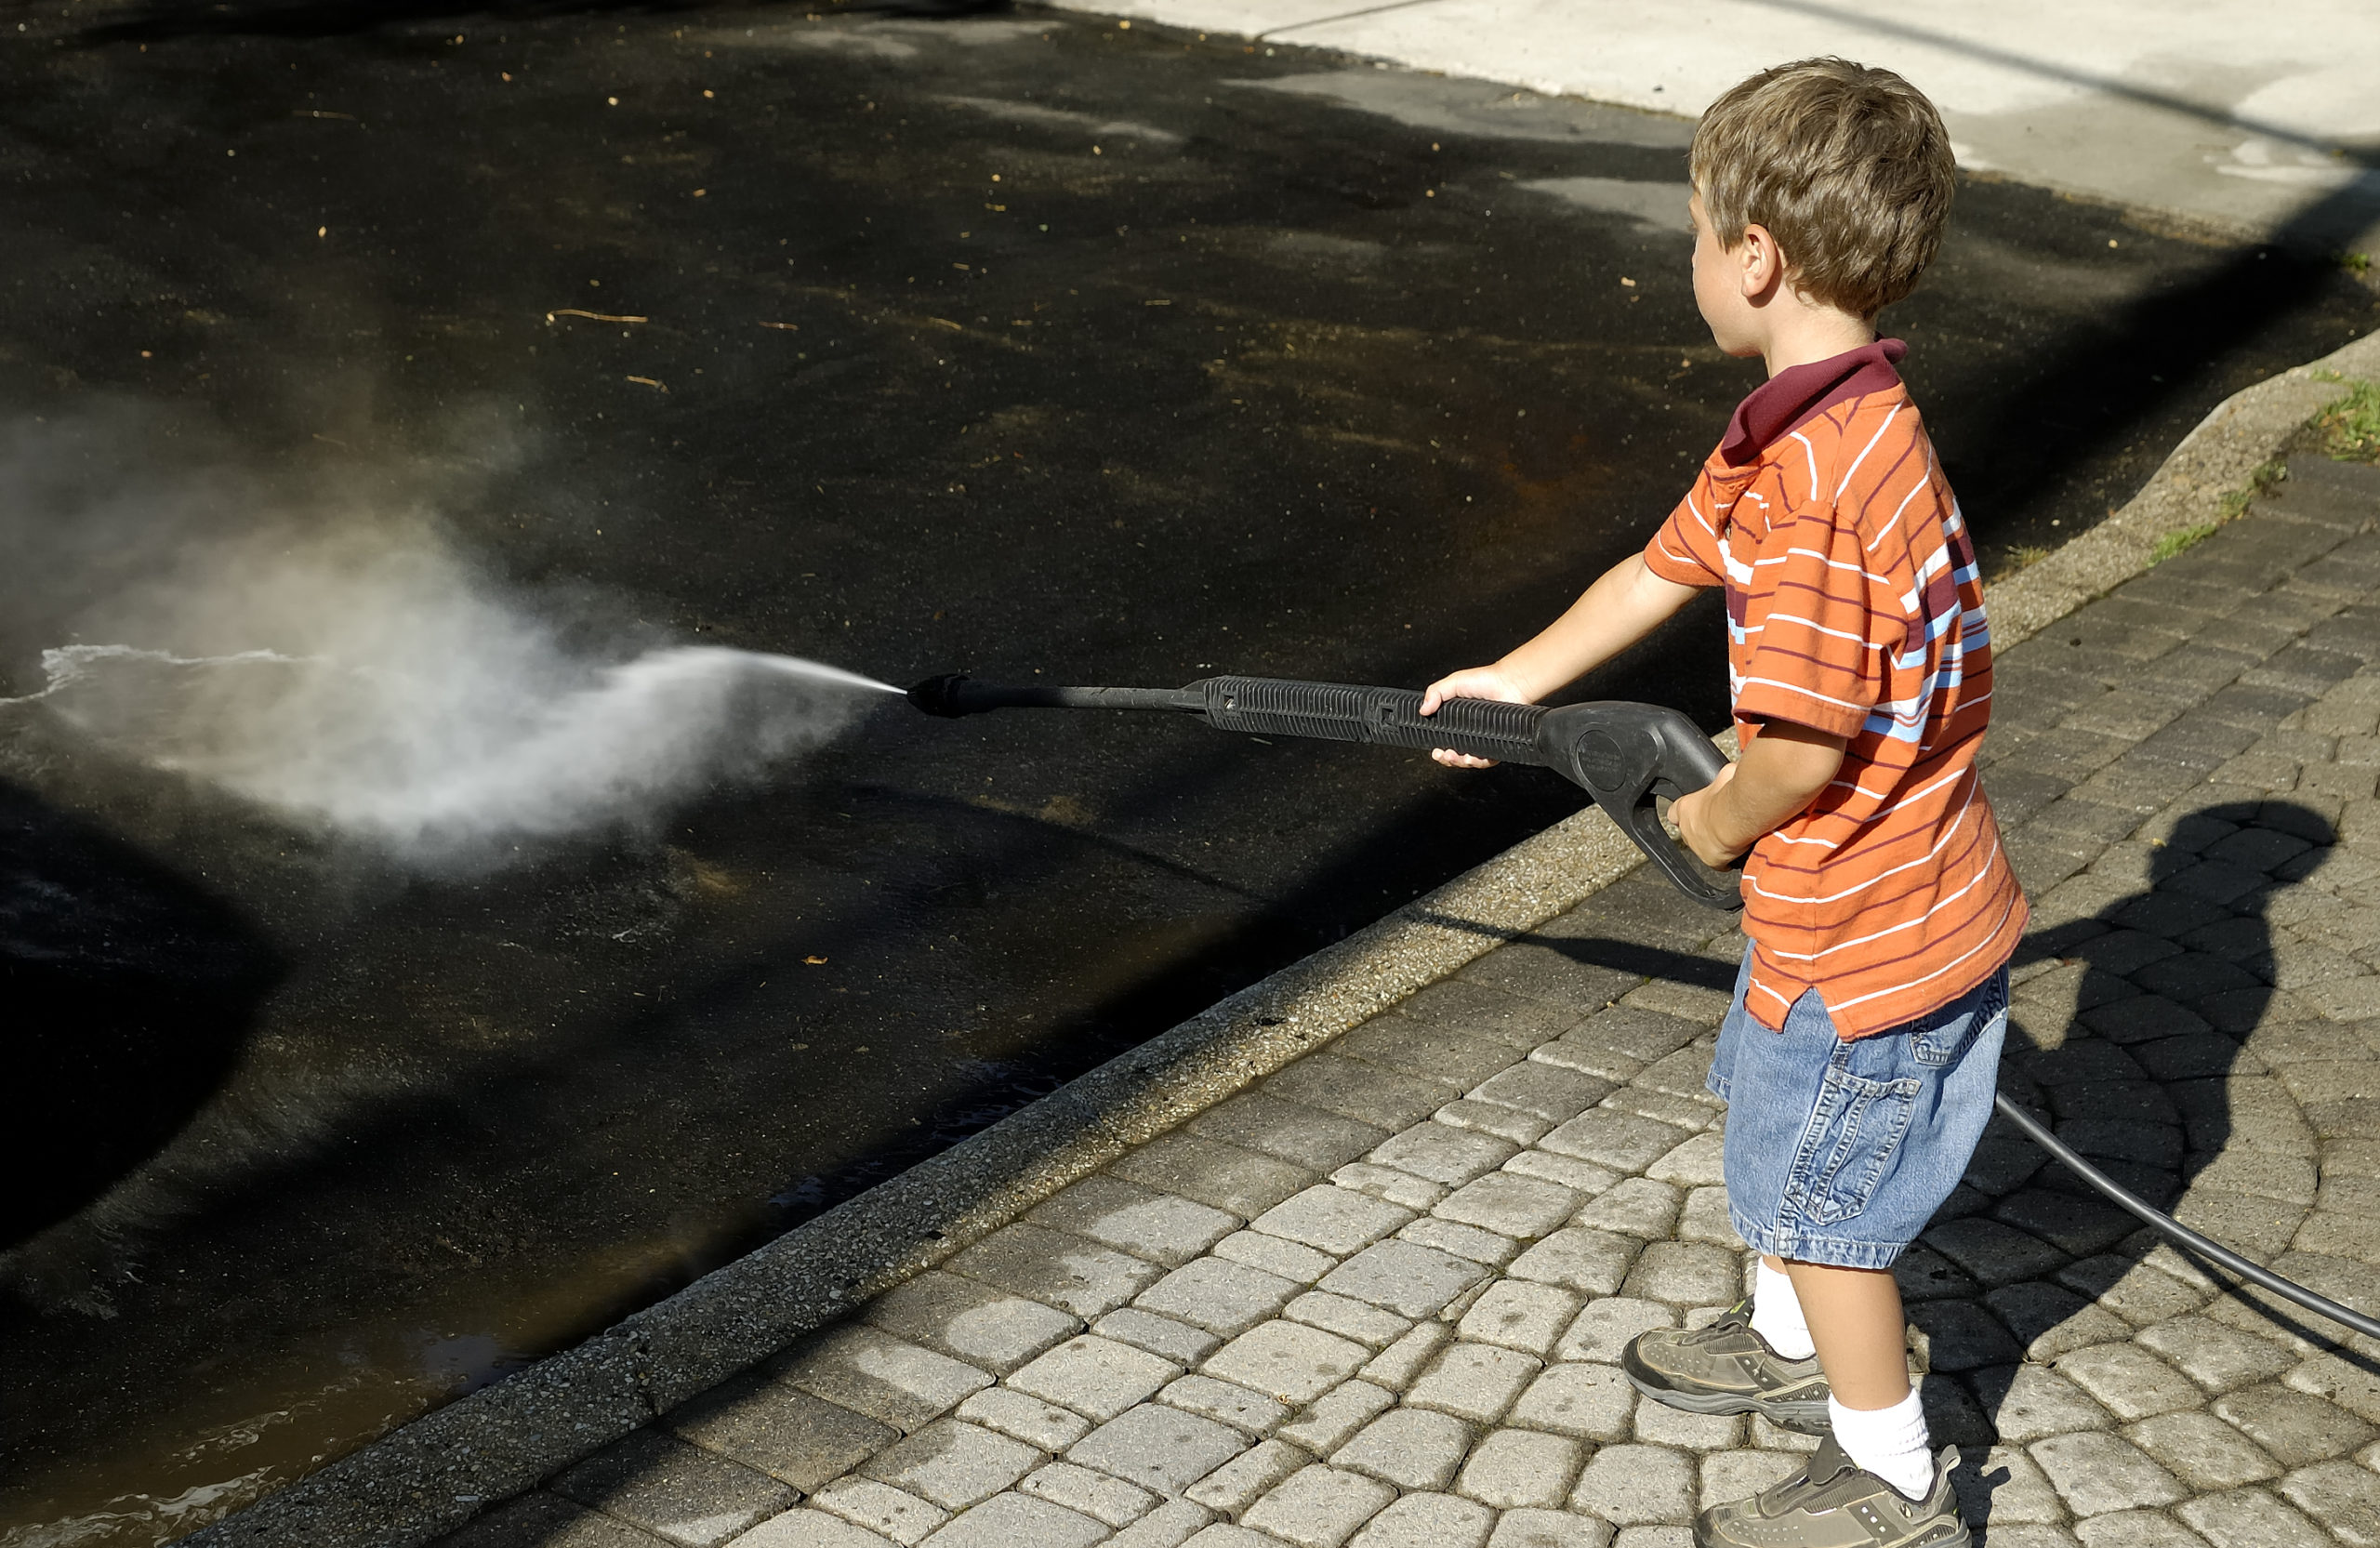 How Does Powerwashing Your Patios And Decks Help Them Last Longer?